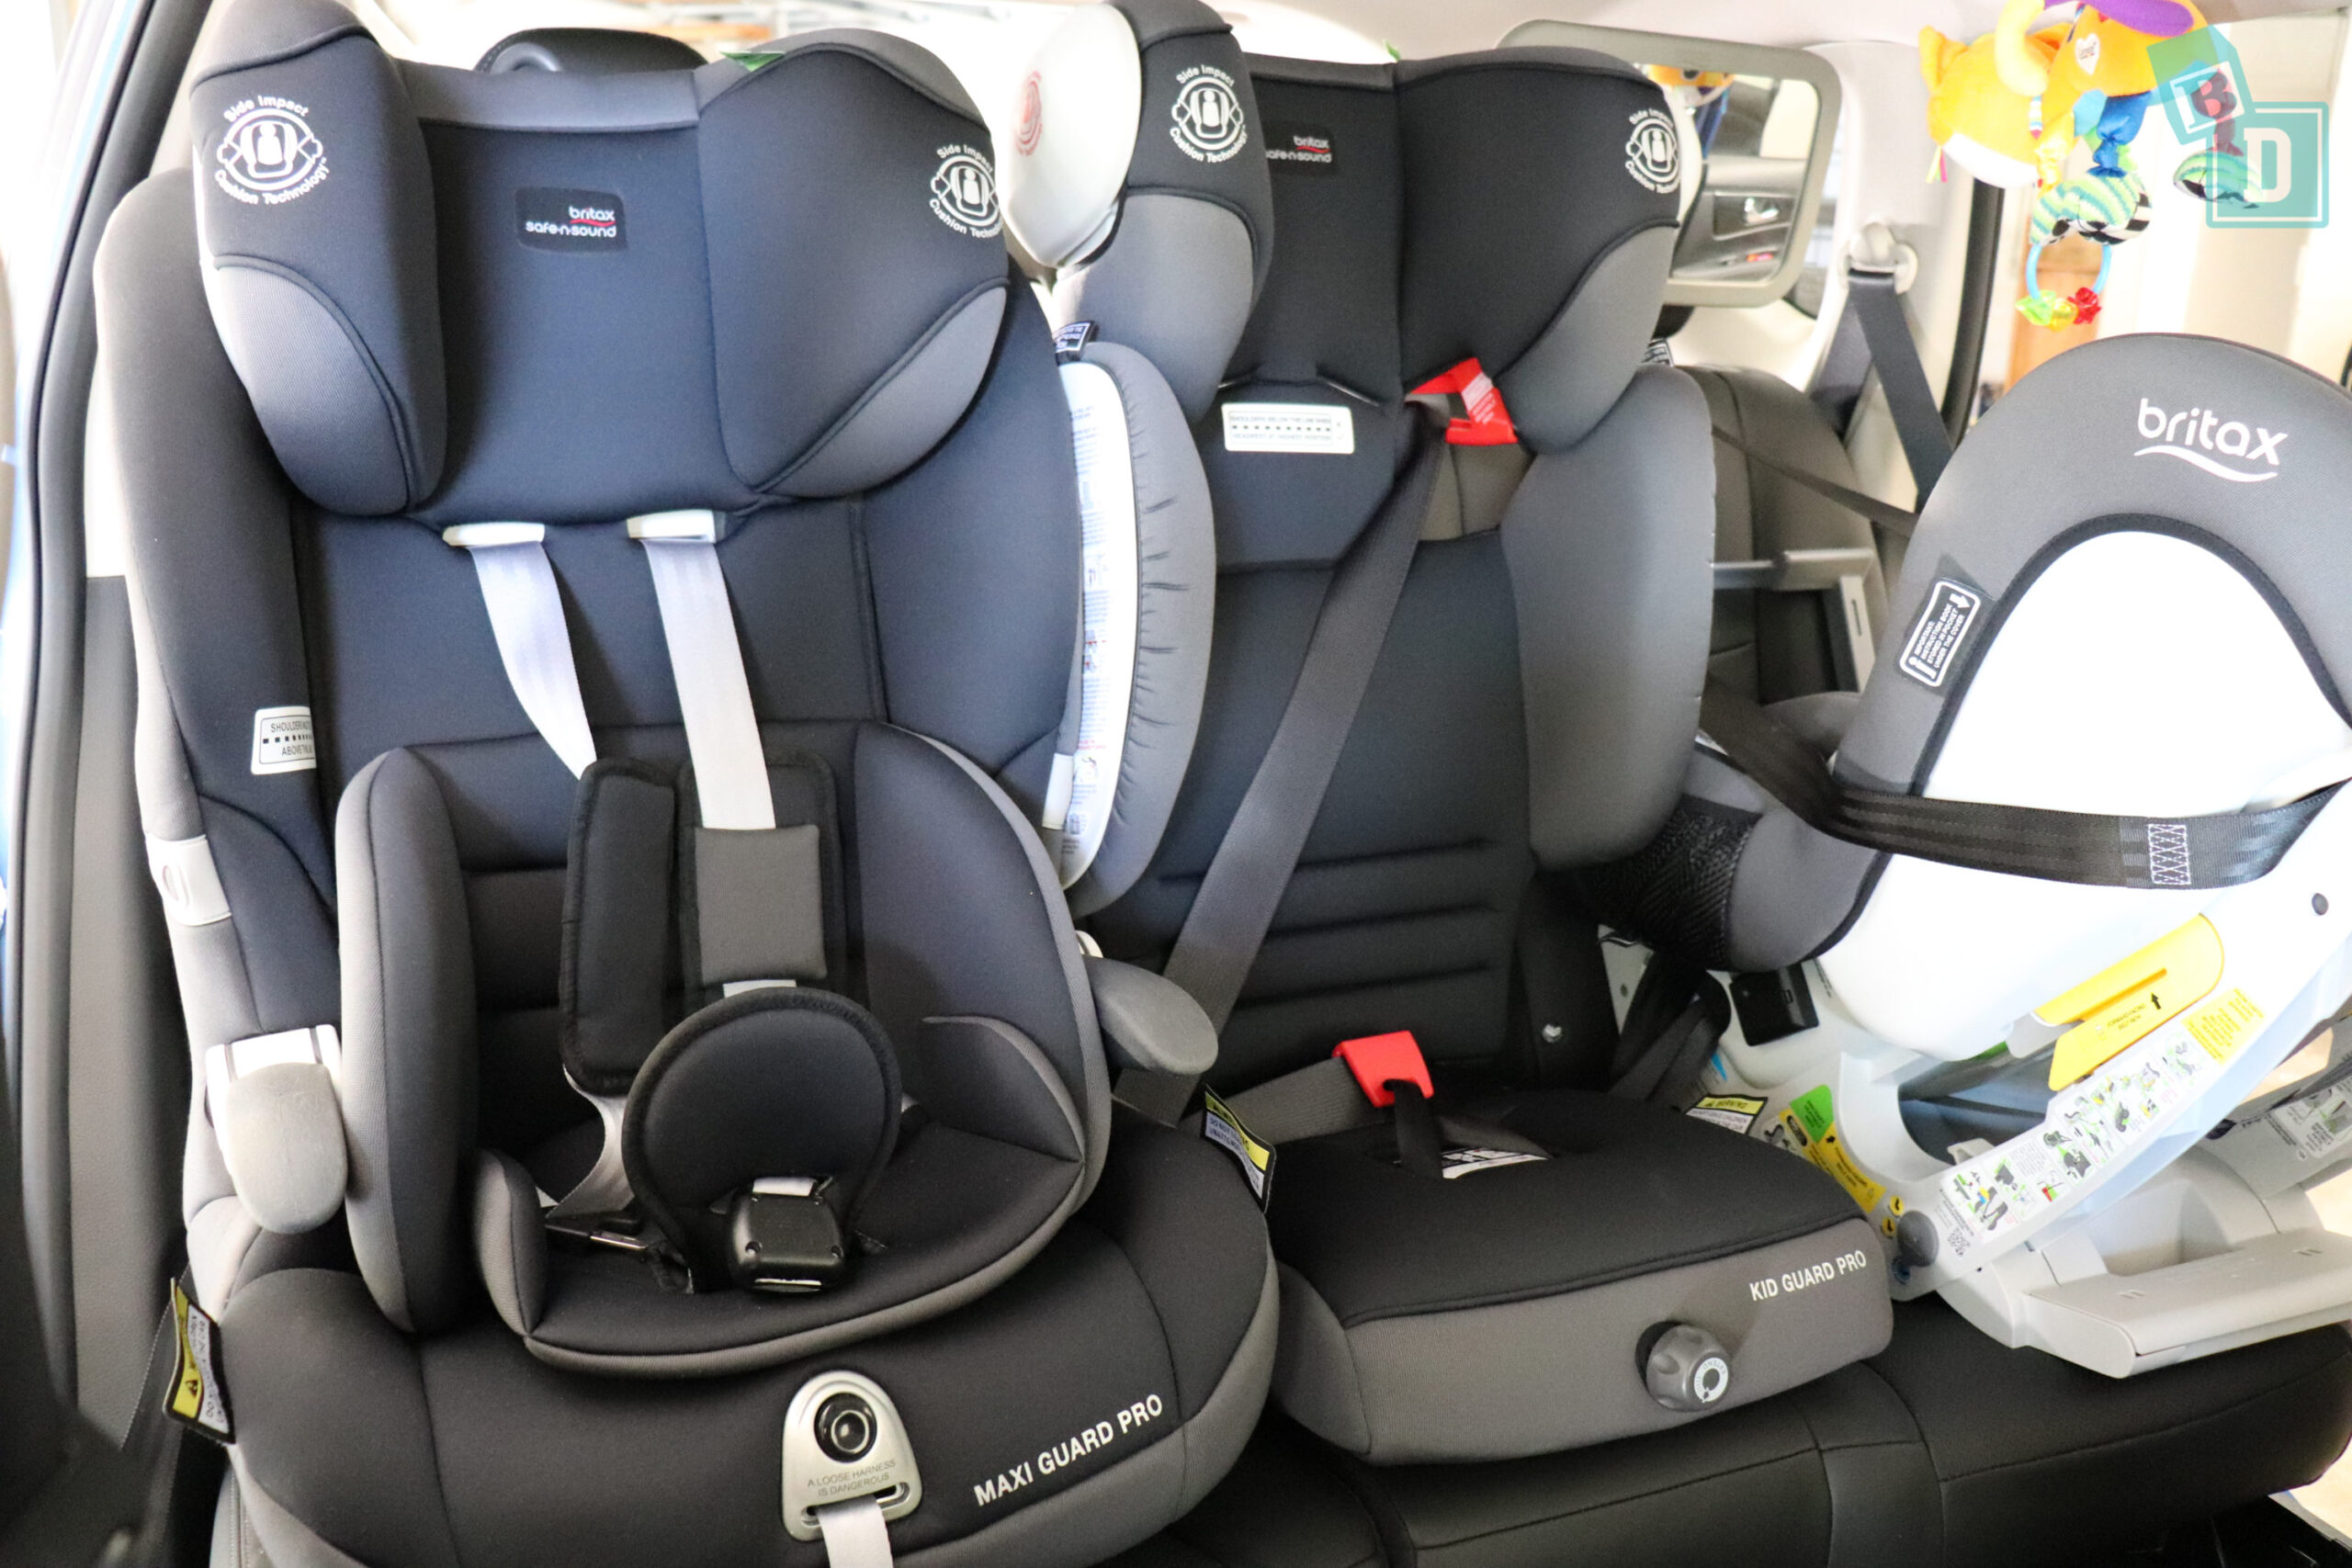 Seat cars will fit 3 child seats across 